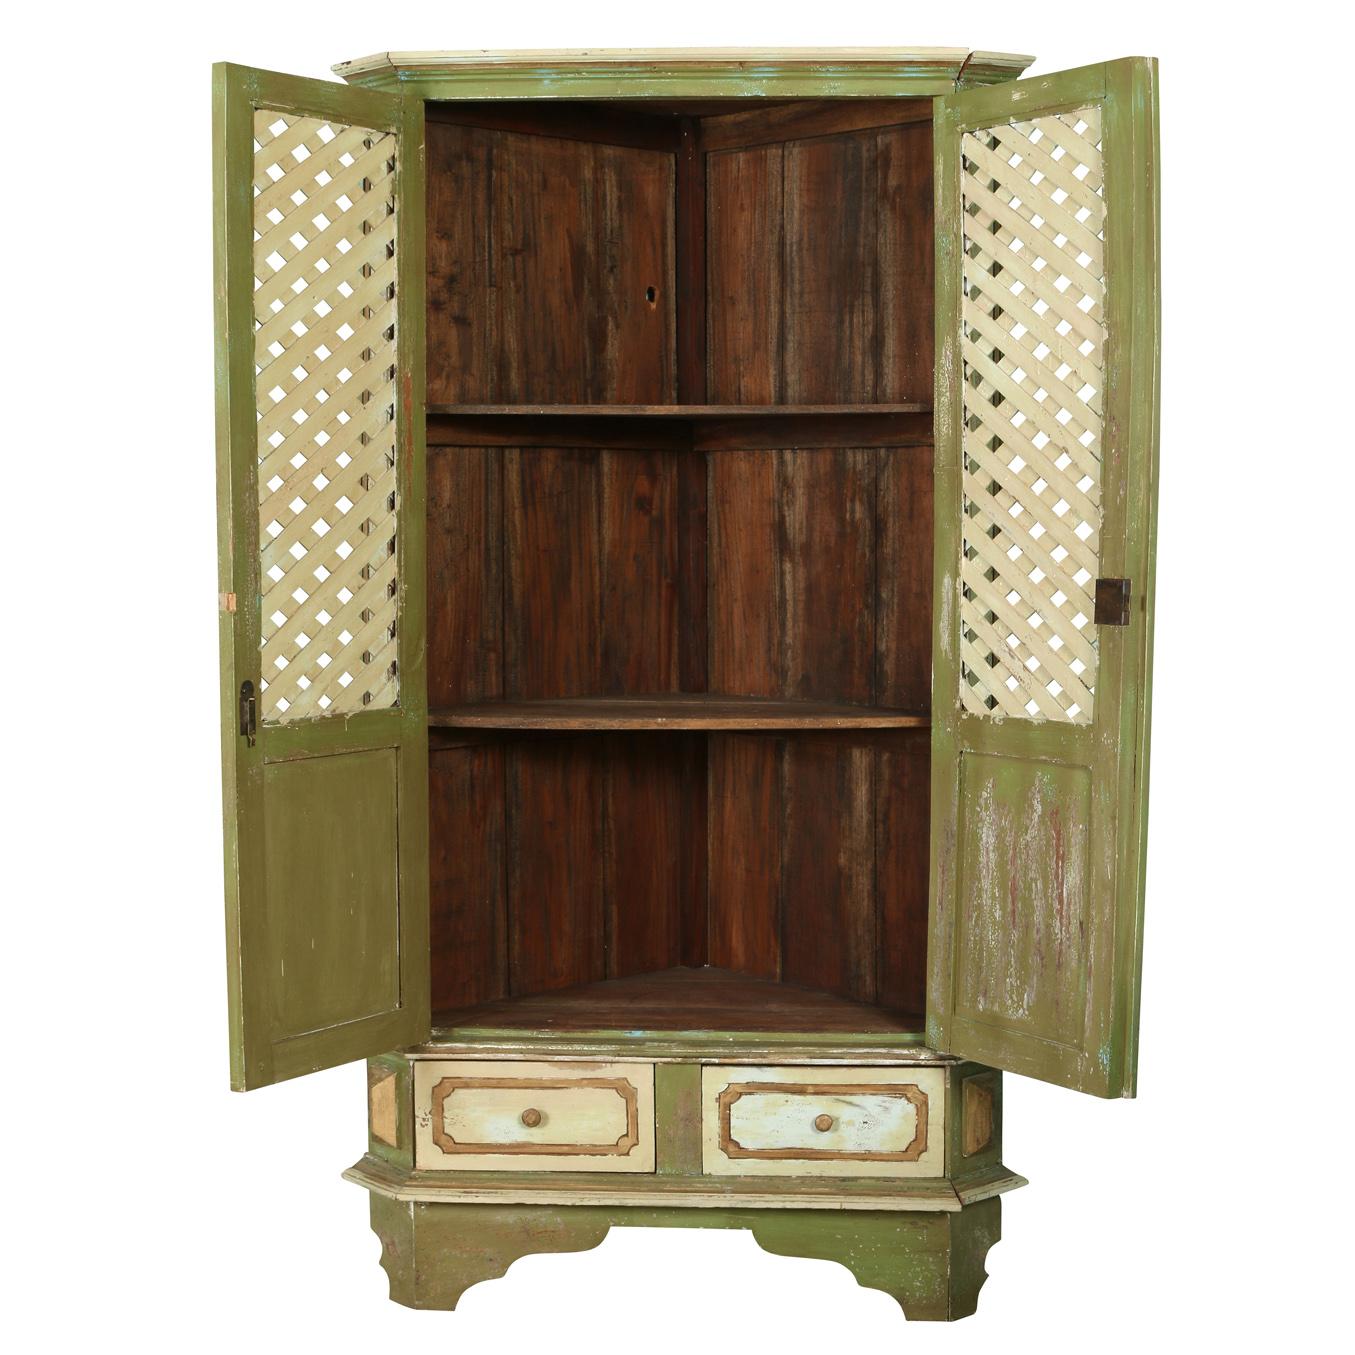 Hand-Painted European Trelliage Painted Corner Wood Cabinet